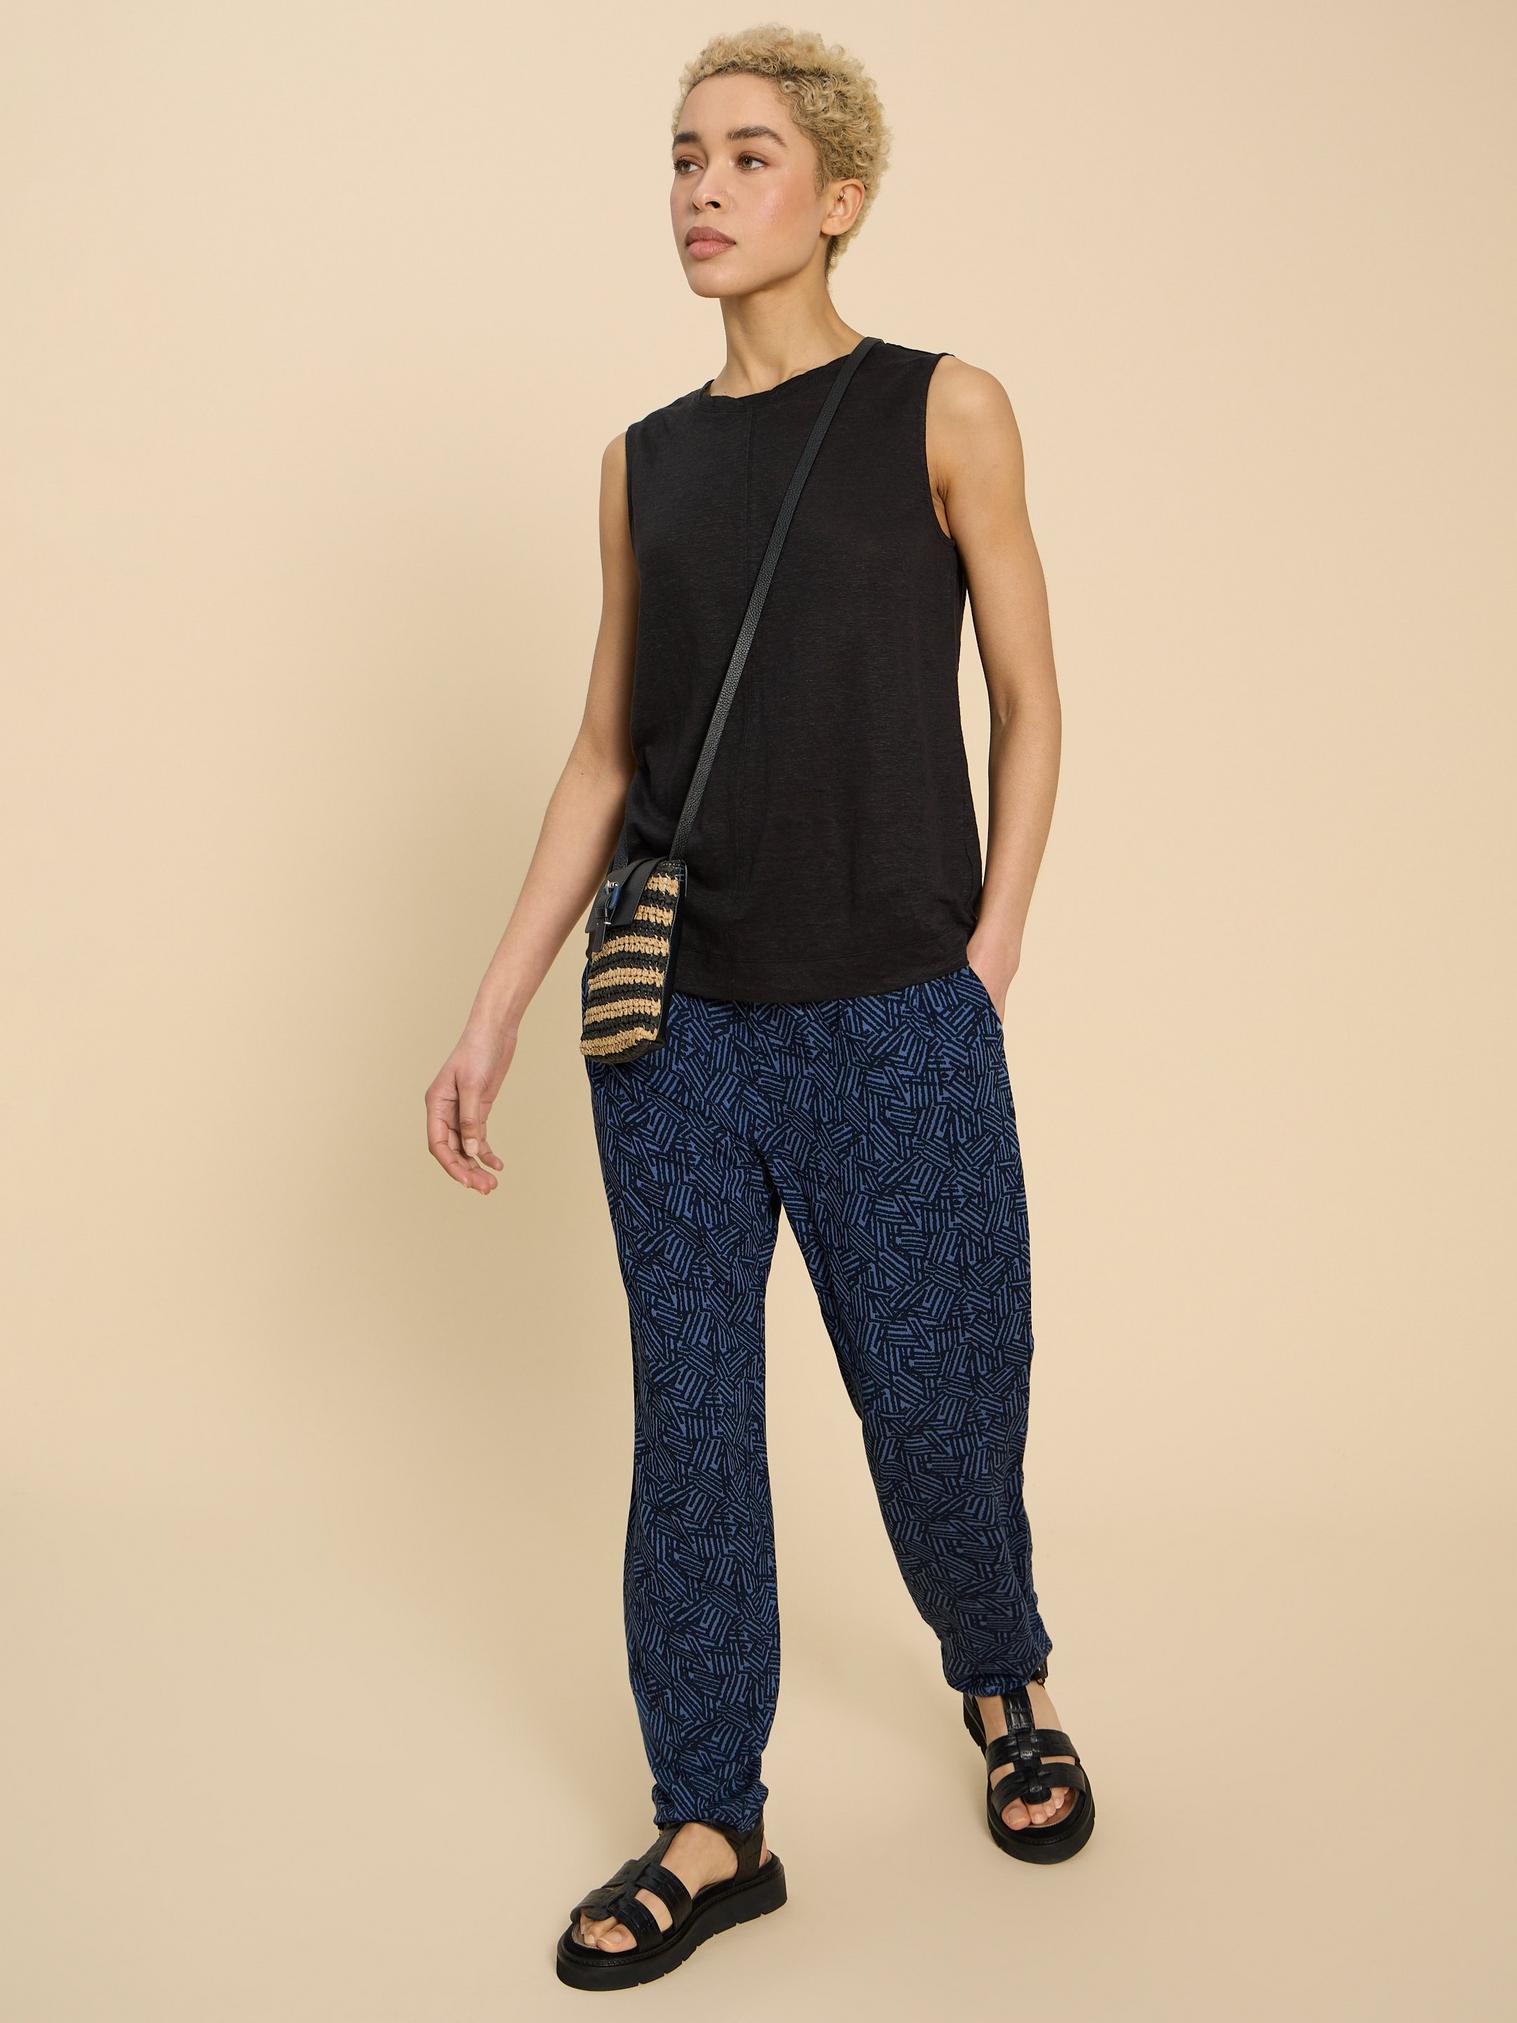 Maison Eco Vero Printed Jersey Trouser in NAVY PR - MODEL FRONT